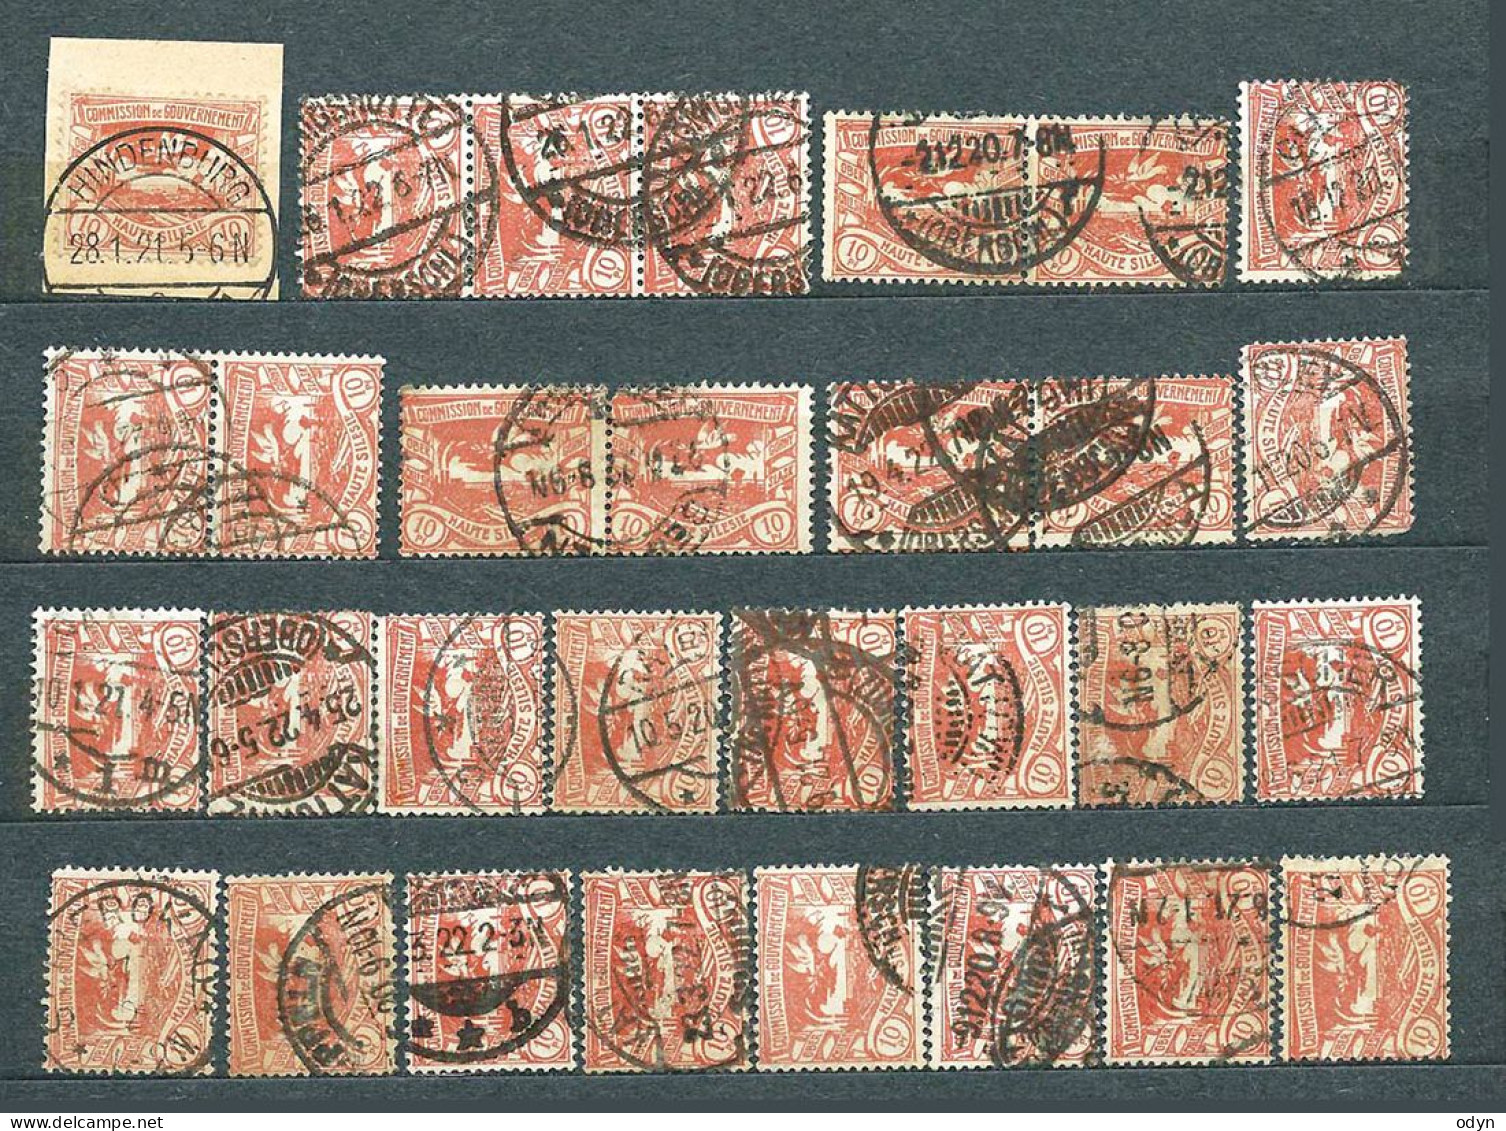 Plebiscite, Upper Silesia, 1920; Lot Of 287 Stamps From Set MiNr 13-29 - Used - Silesia